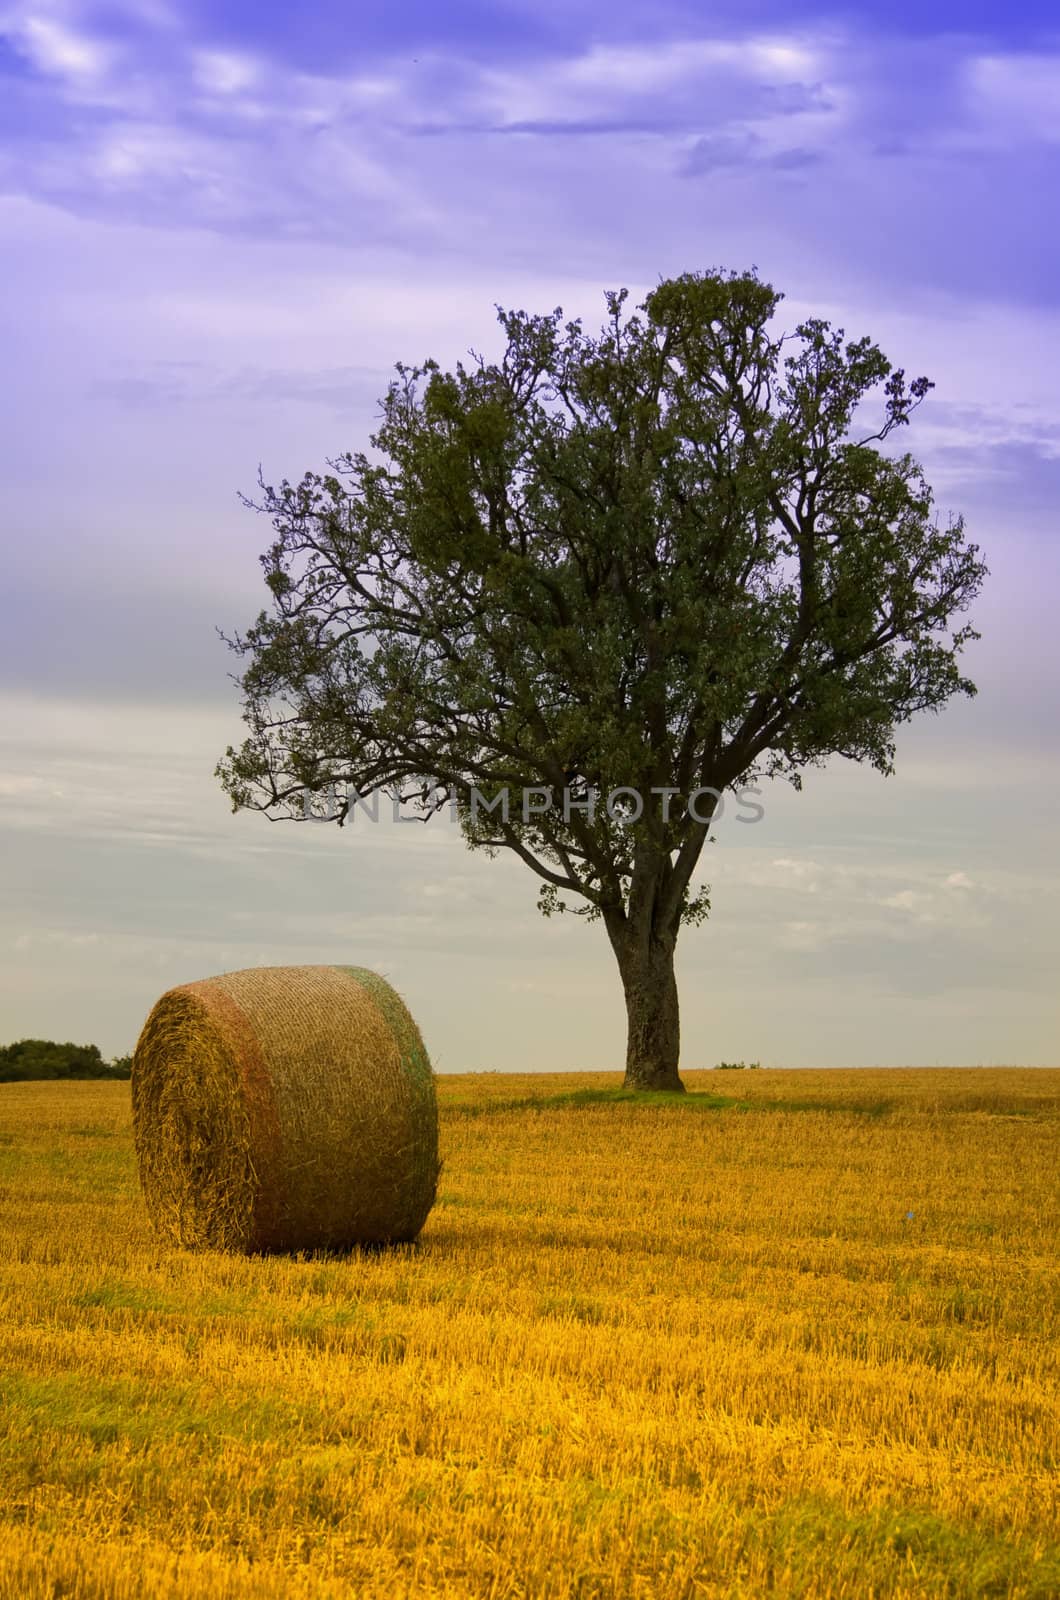 straw ball and a tree by njaj